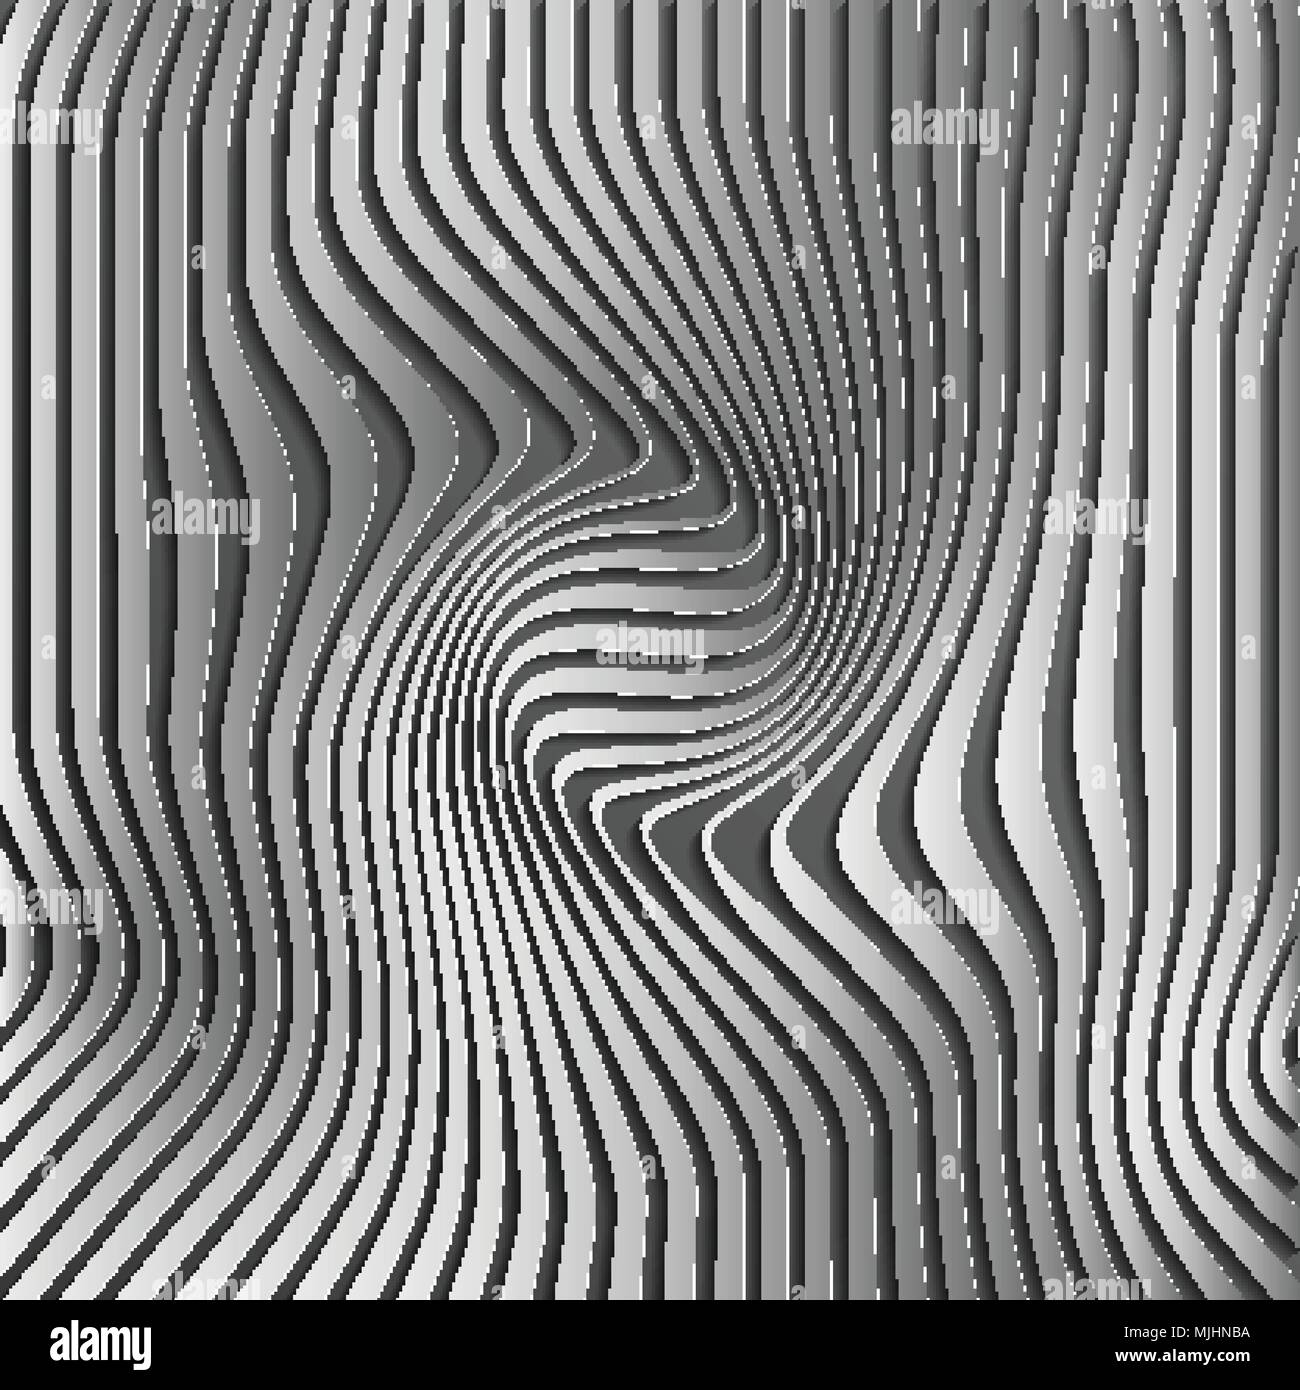 Chromium abstract silver stripe pattern background.Optical illusion, twisted lines, abstract curves background. The illusion of depth and perspective.Abstract 3d vector illustration. Eps 10. Stock Vector